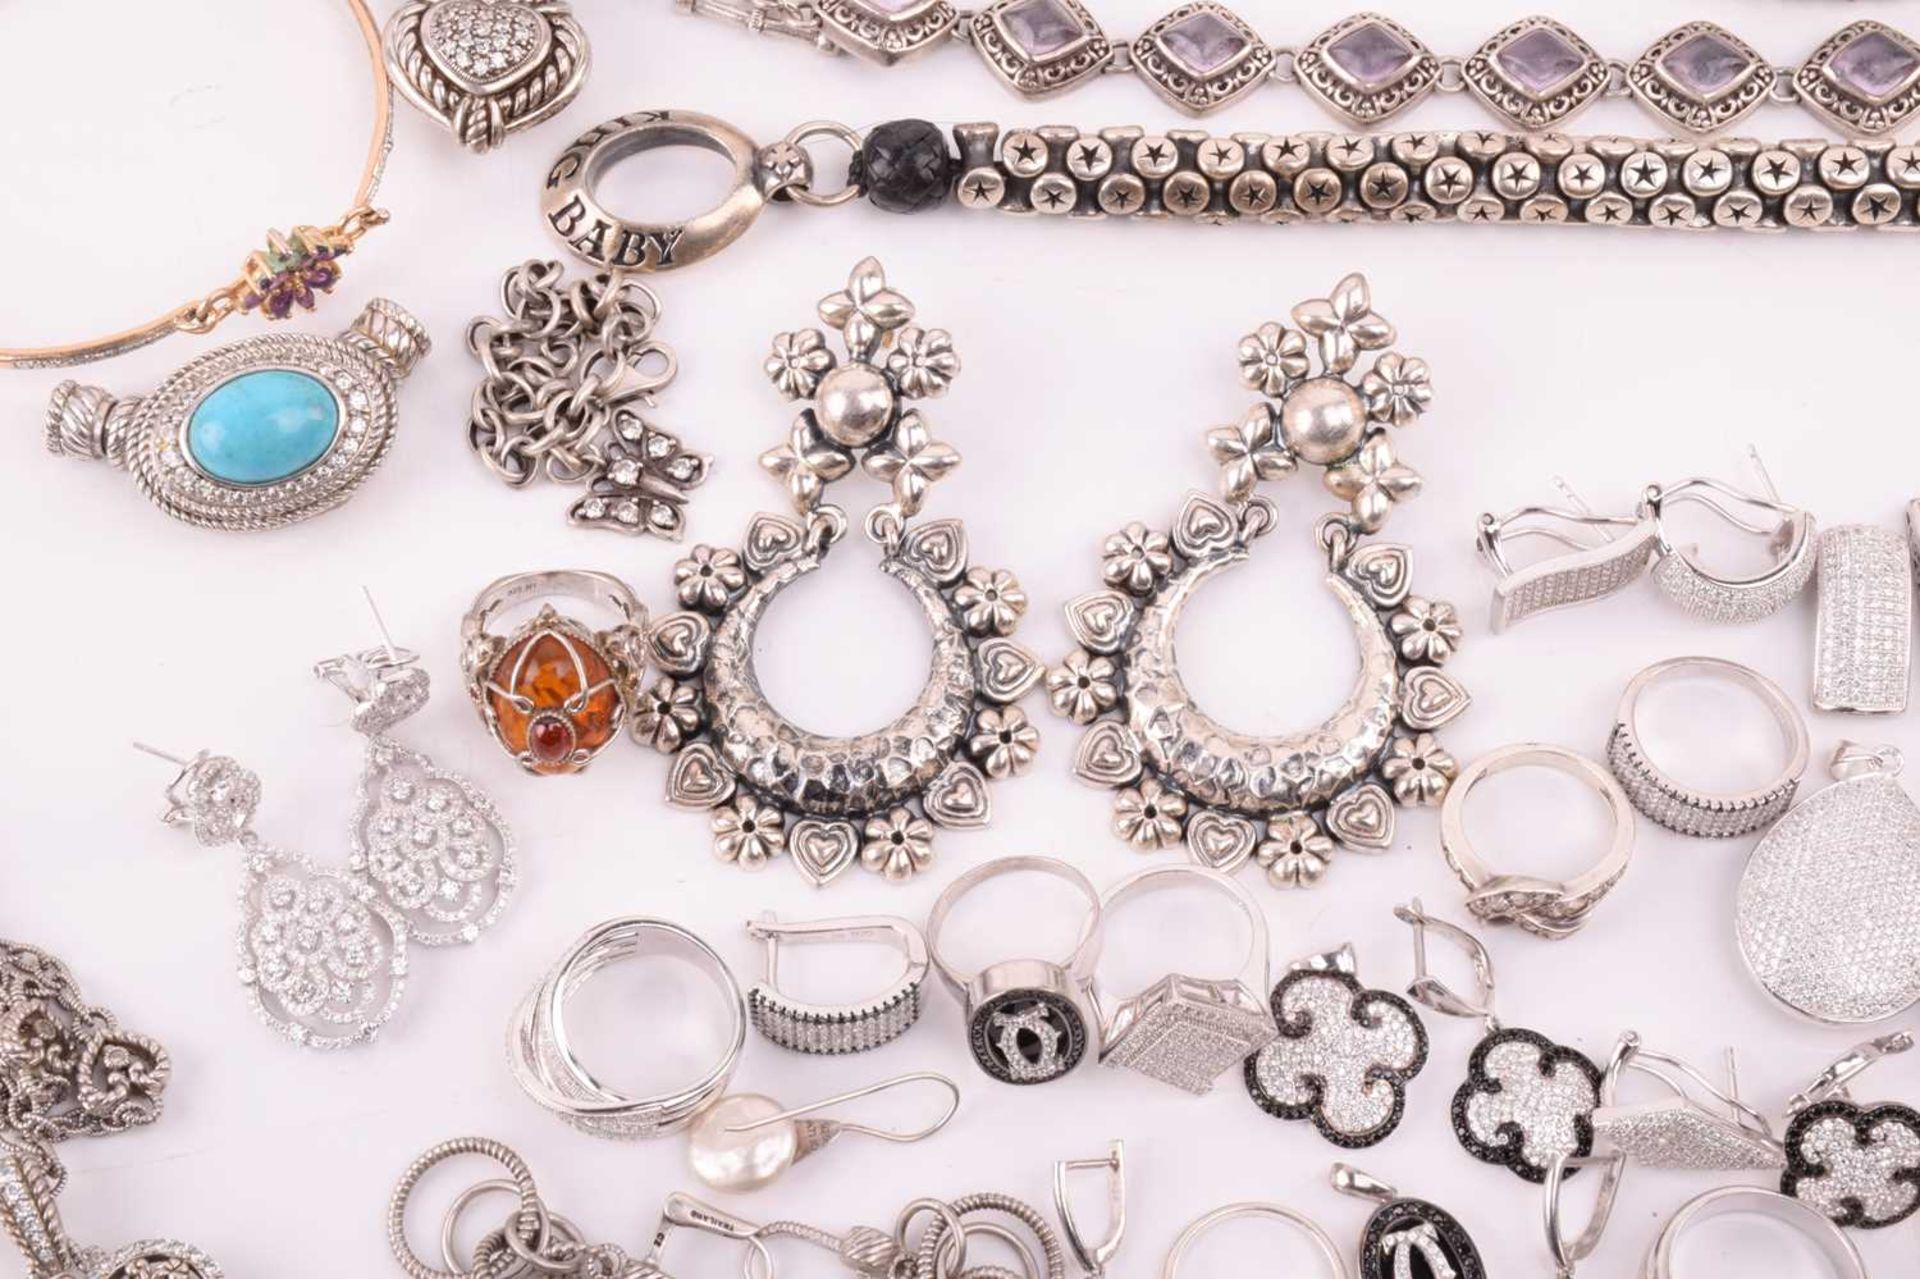 A collection of jewellery in white metal, including Thai pendants, earings and rings in white - Image 5 of 7